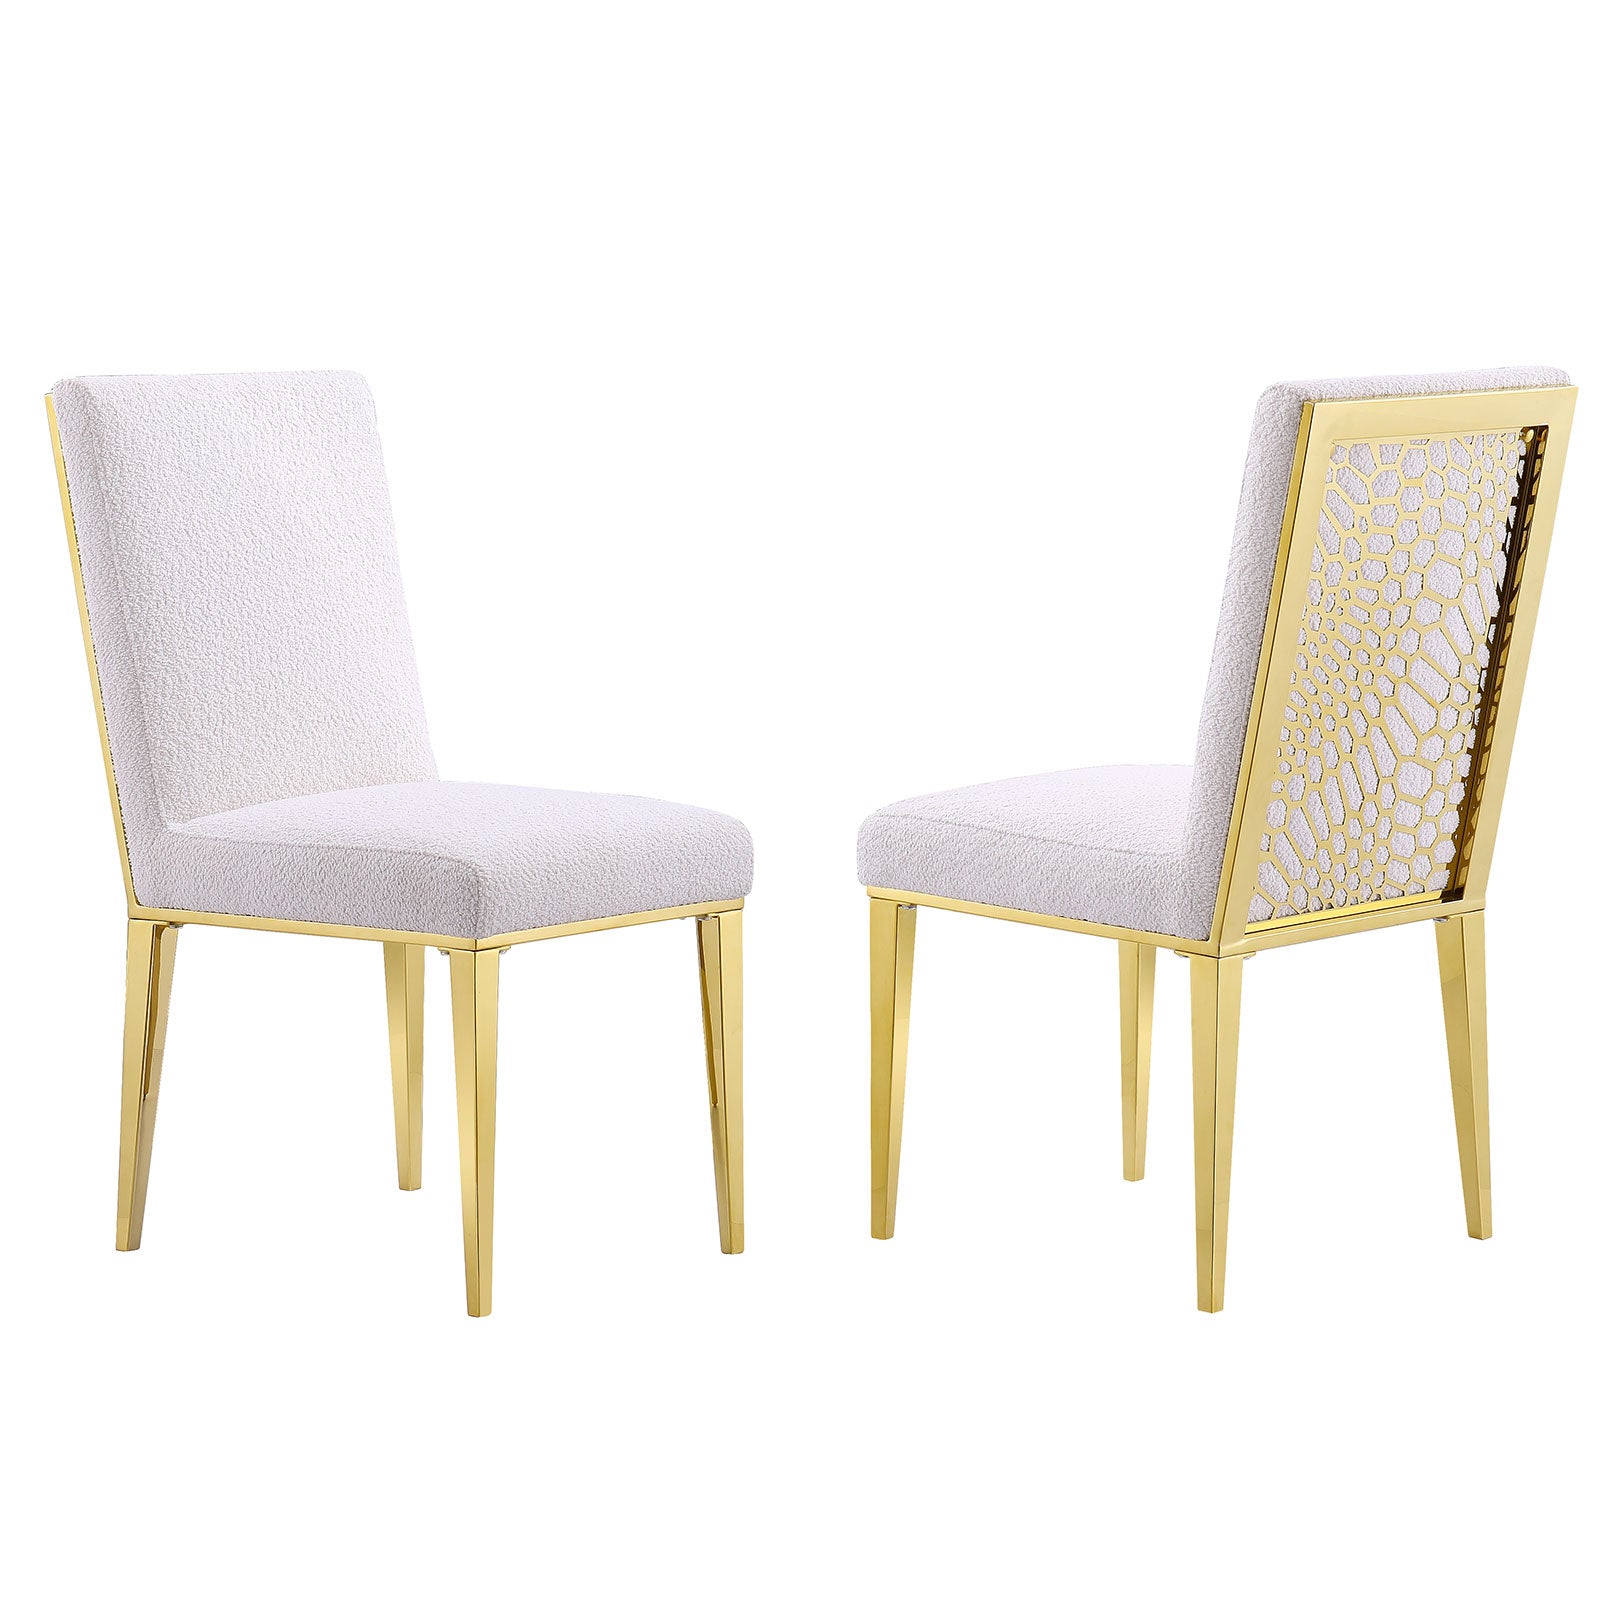 Add a Touch of Glamour to Your Home with Dining Chairs with Gold Legs